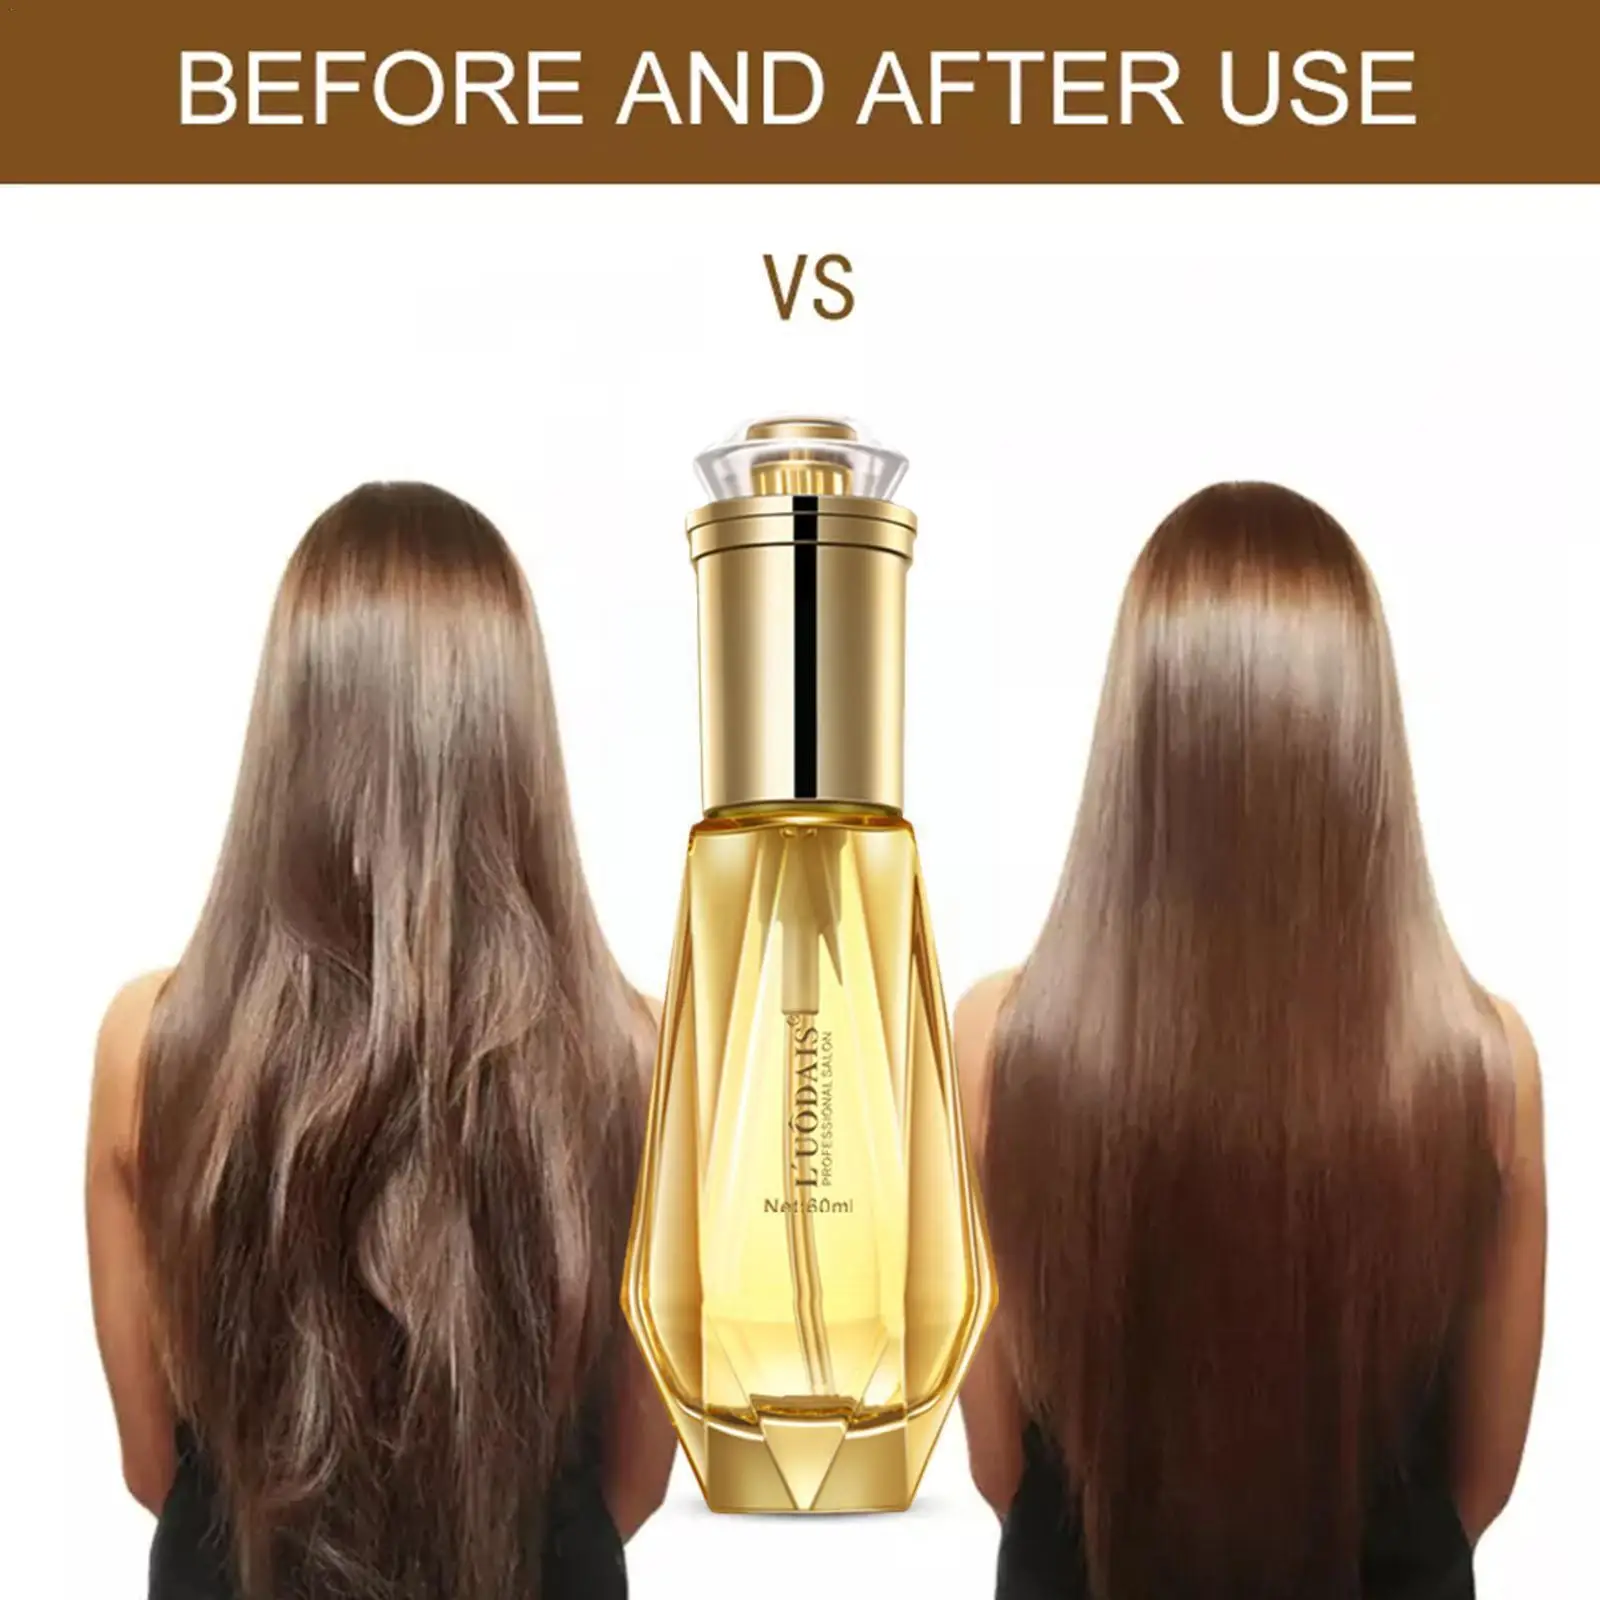 Golden Lure Pheromone Hair Oil Care Essential Long Extract Nourish Treatment Effective Hair Anti Roots Lasting Hair Care J4G6